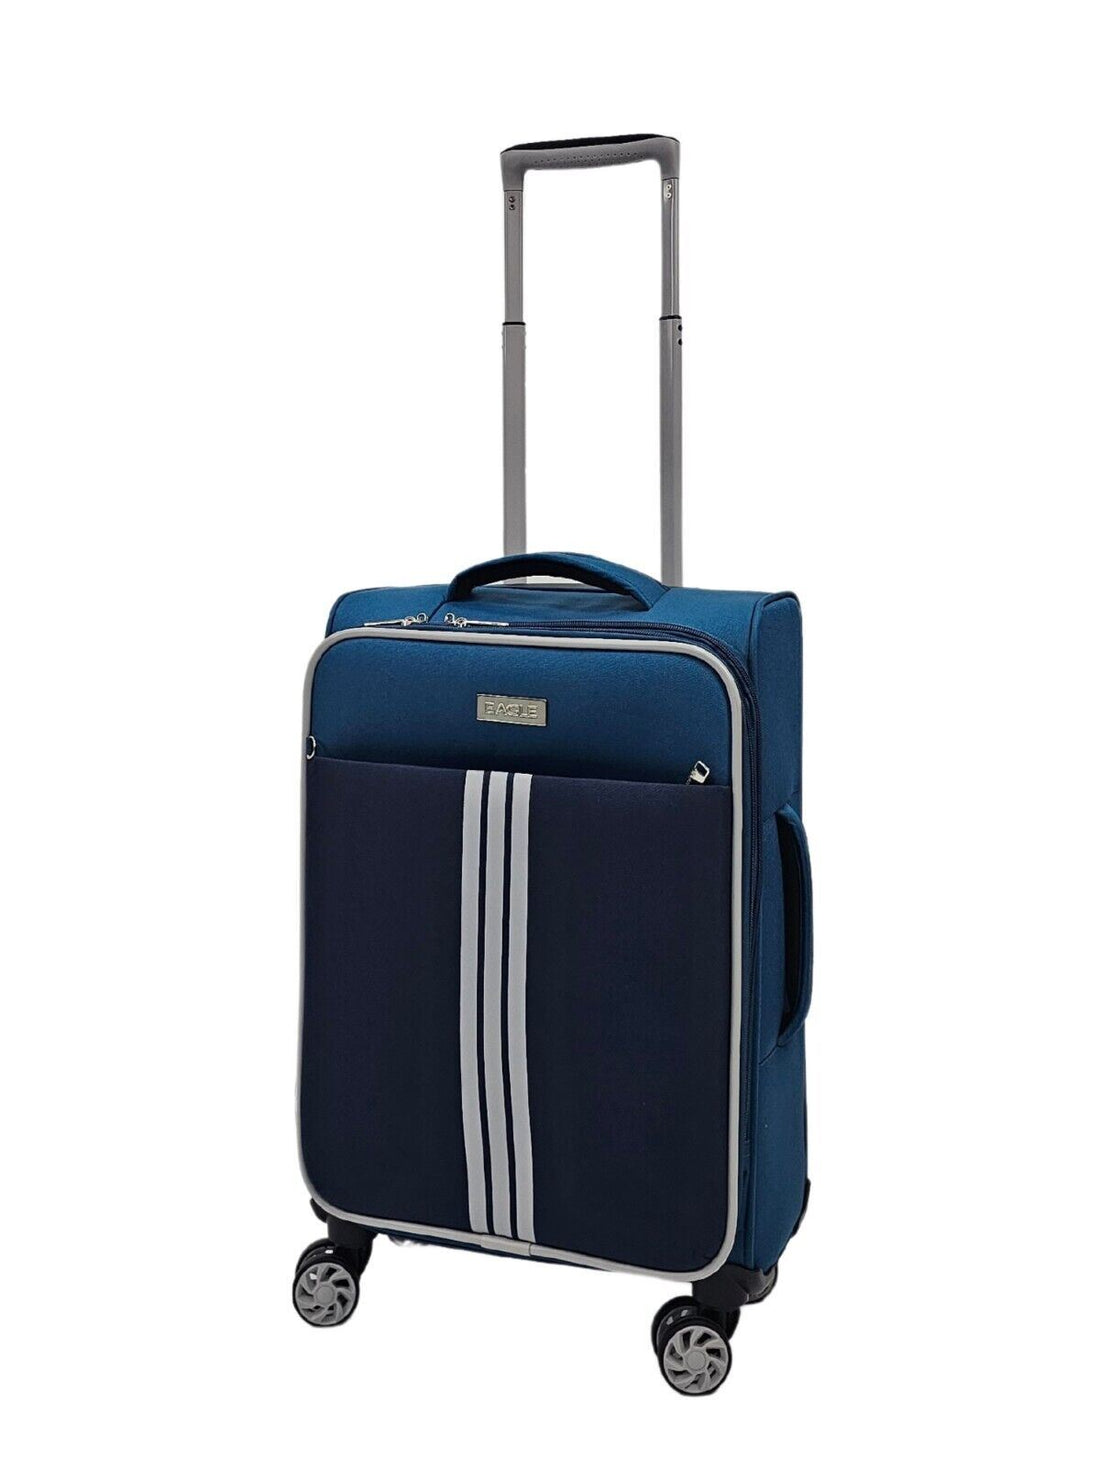 Beaverton Cabin Soft Shell Suitcase in Teal